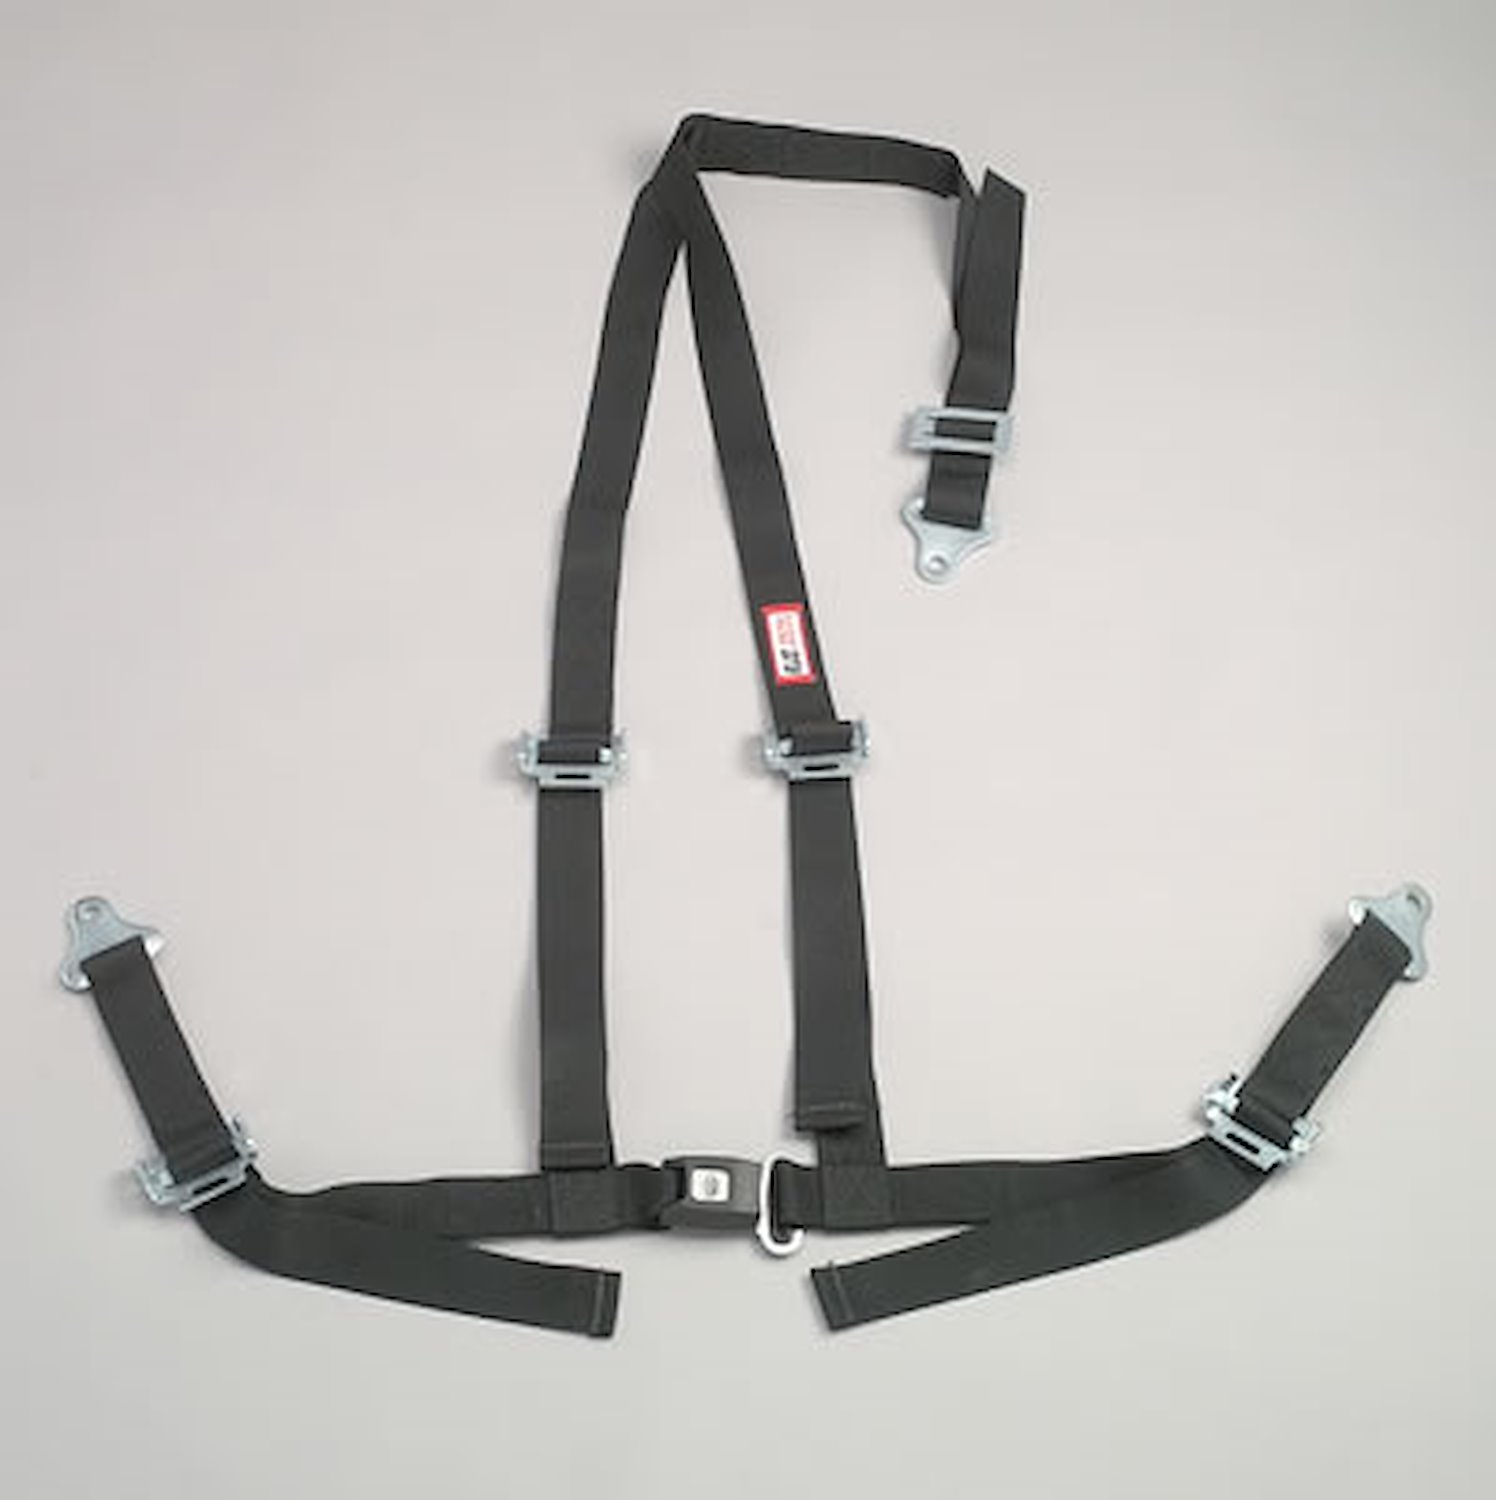 NON-SFI B&T HARNESS 2 PULL DOWN Lap Belt 2 S. H. Individual FLOOR Mount ALL WRAP ENDS w/STERNUM STRAP ORANGE